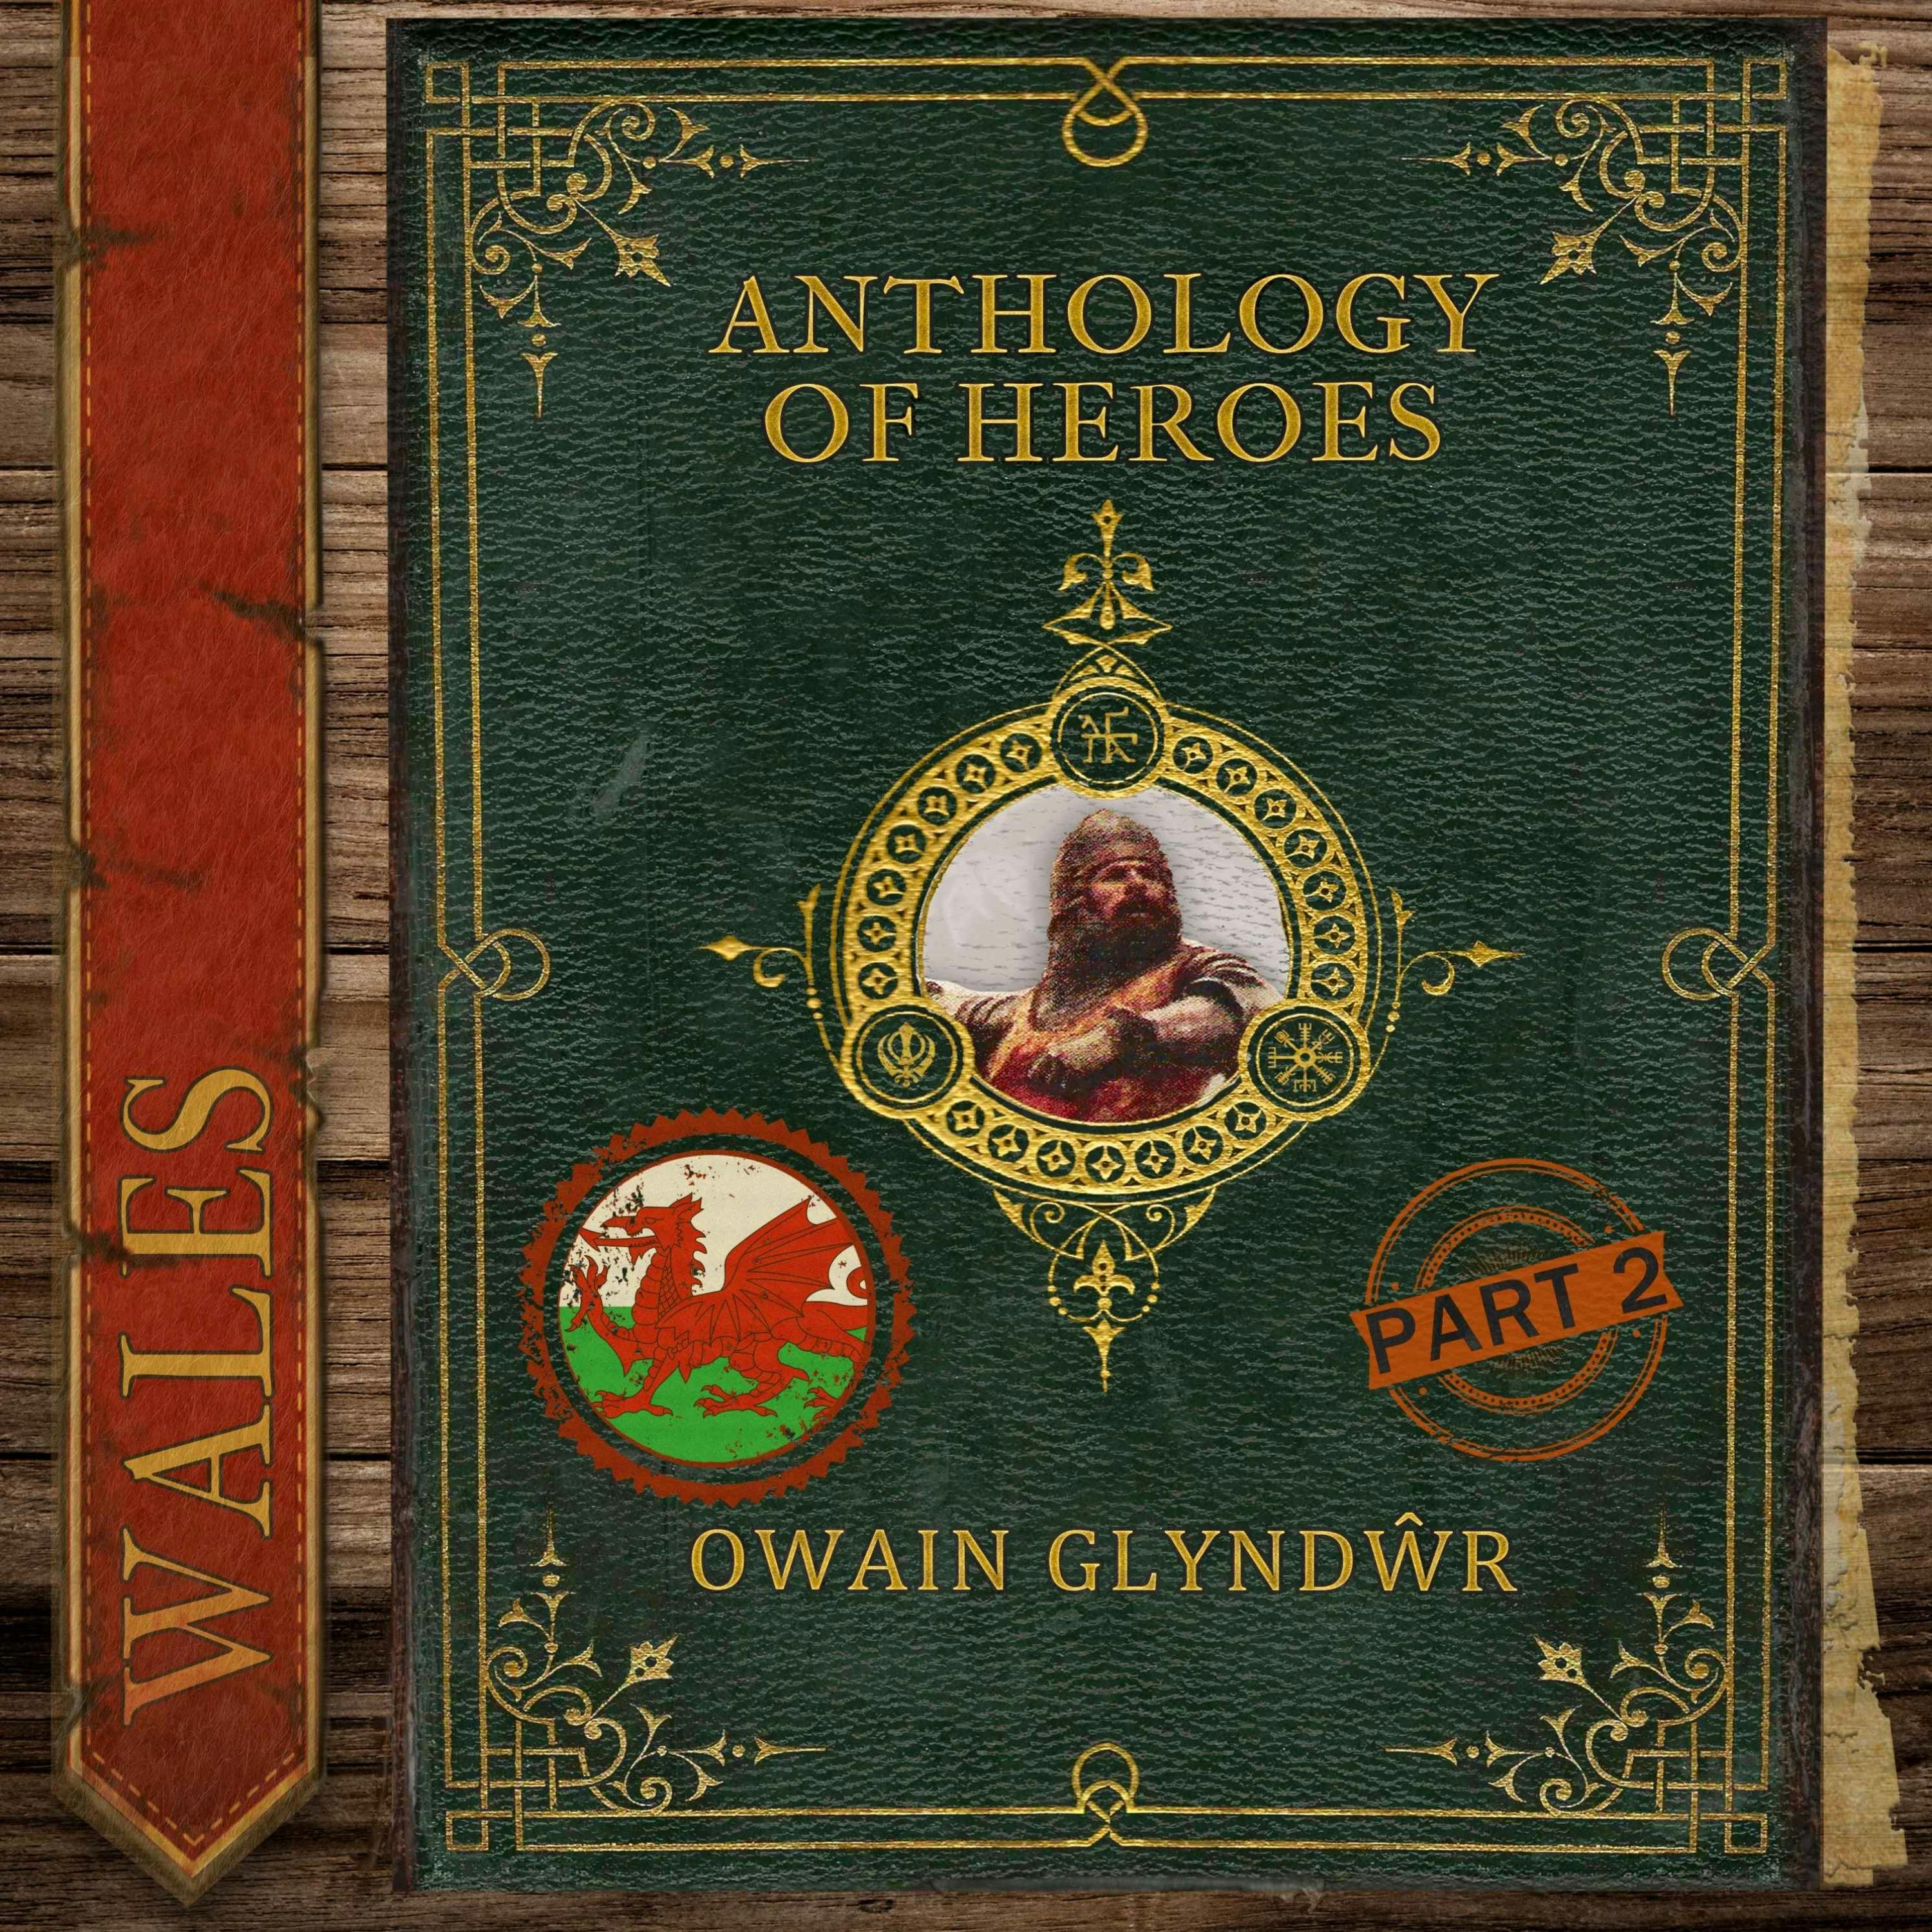 The Last Prince of Wales: Owain Glyndŵr and the Welsh Revolt | Part 2